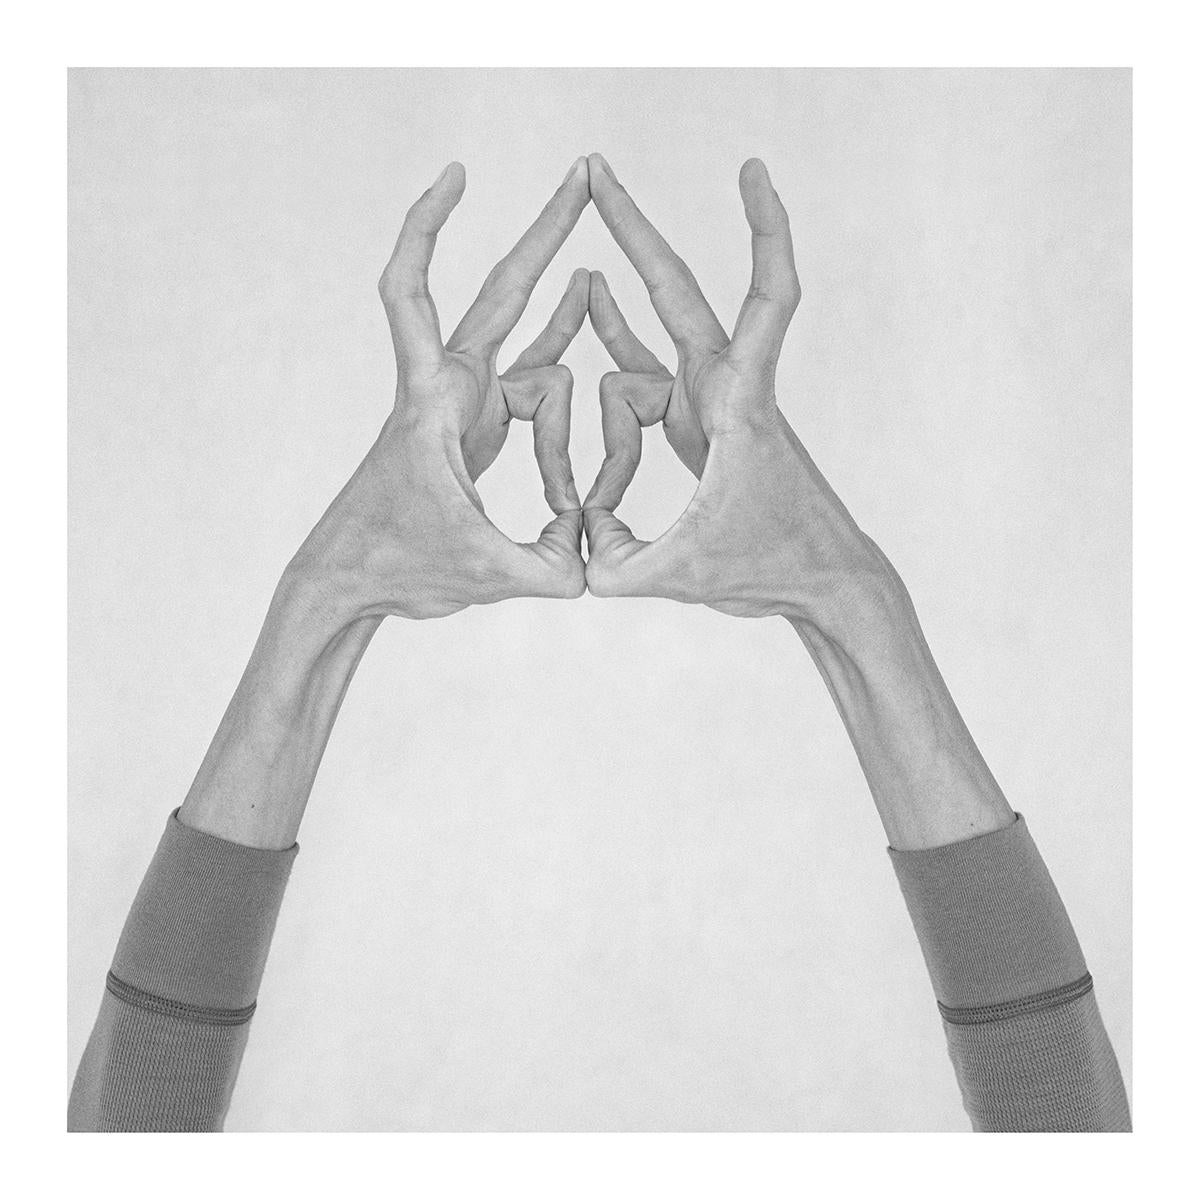 Untitled XIII, XIV, and XV From the Series Chiromorphose. Hands - Photograph by Nico Baixas / Gos-com-fuig